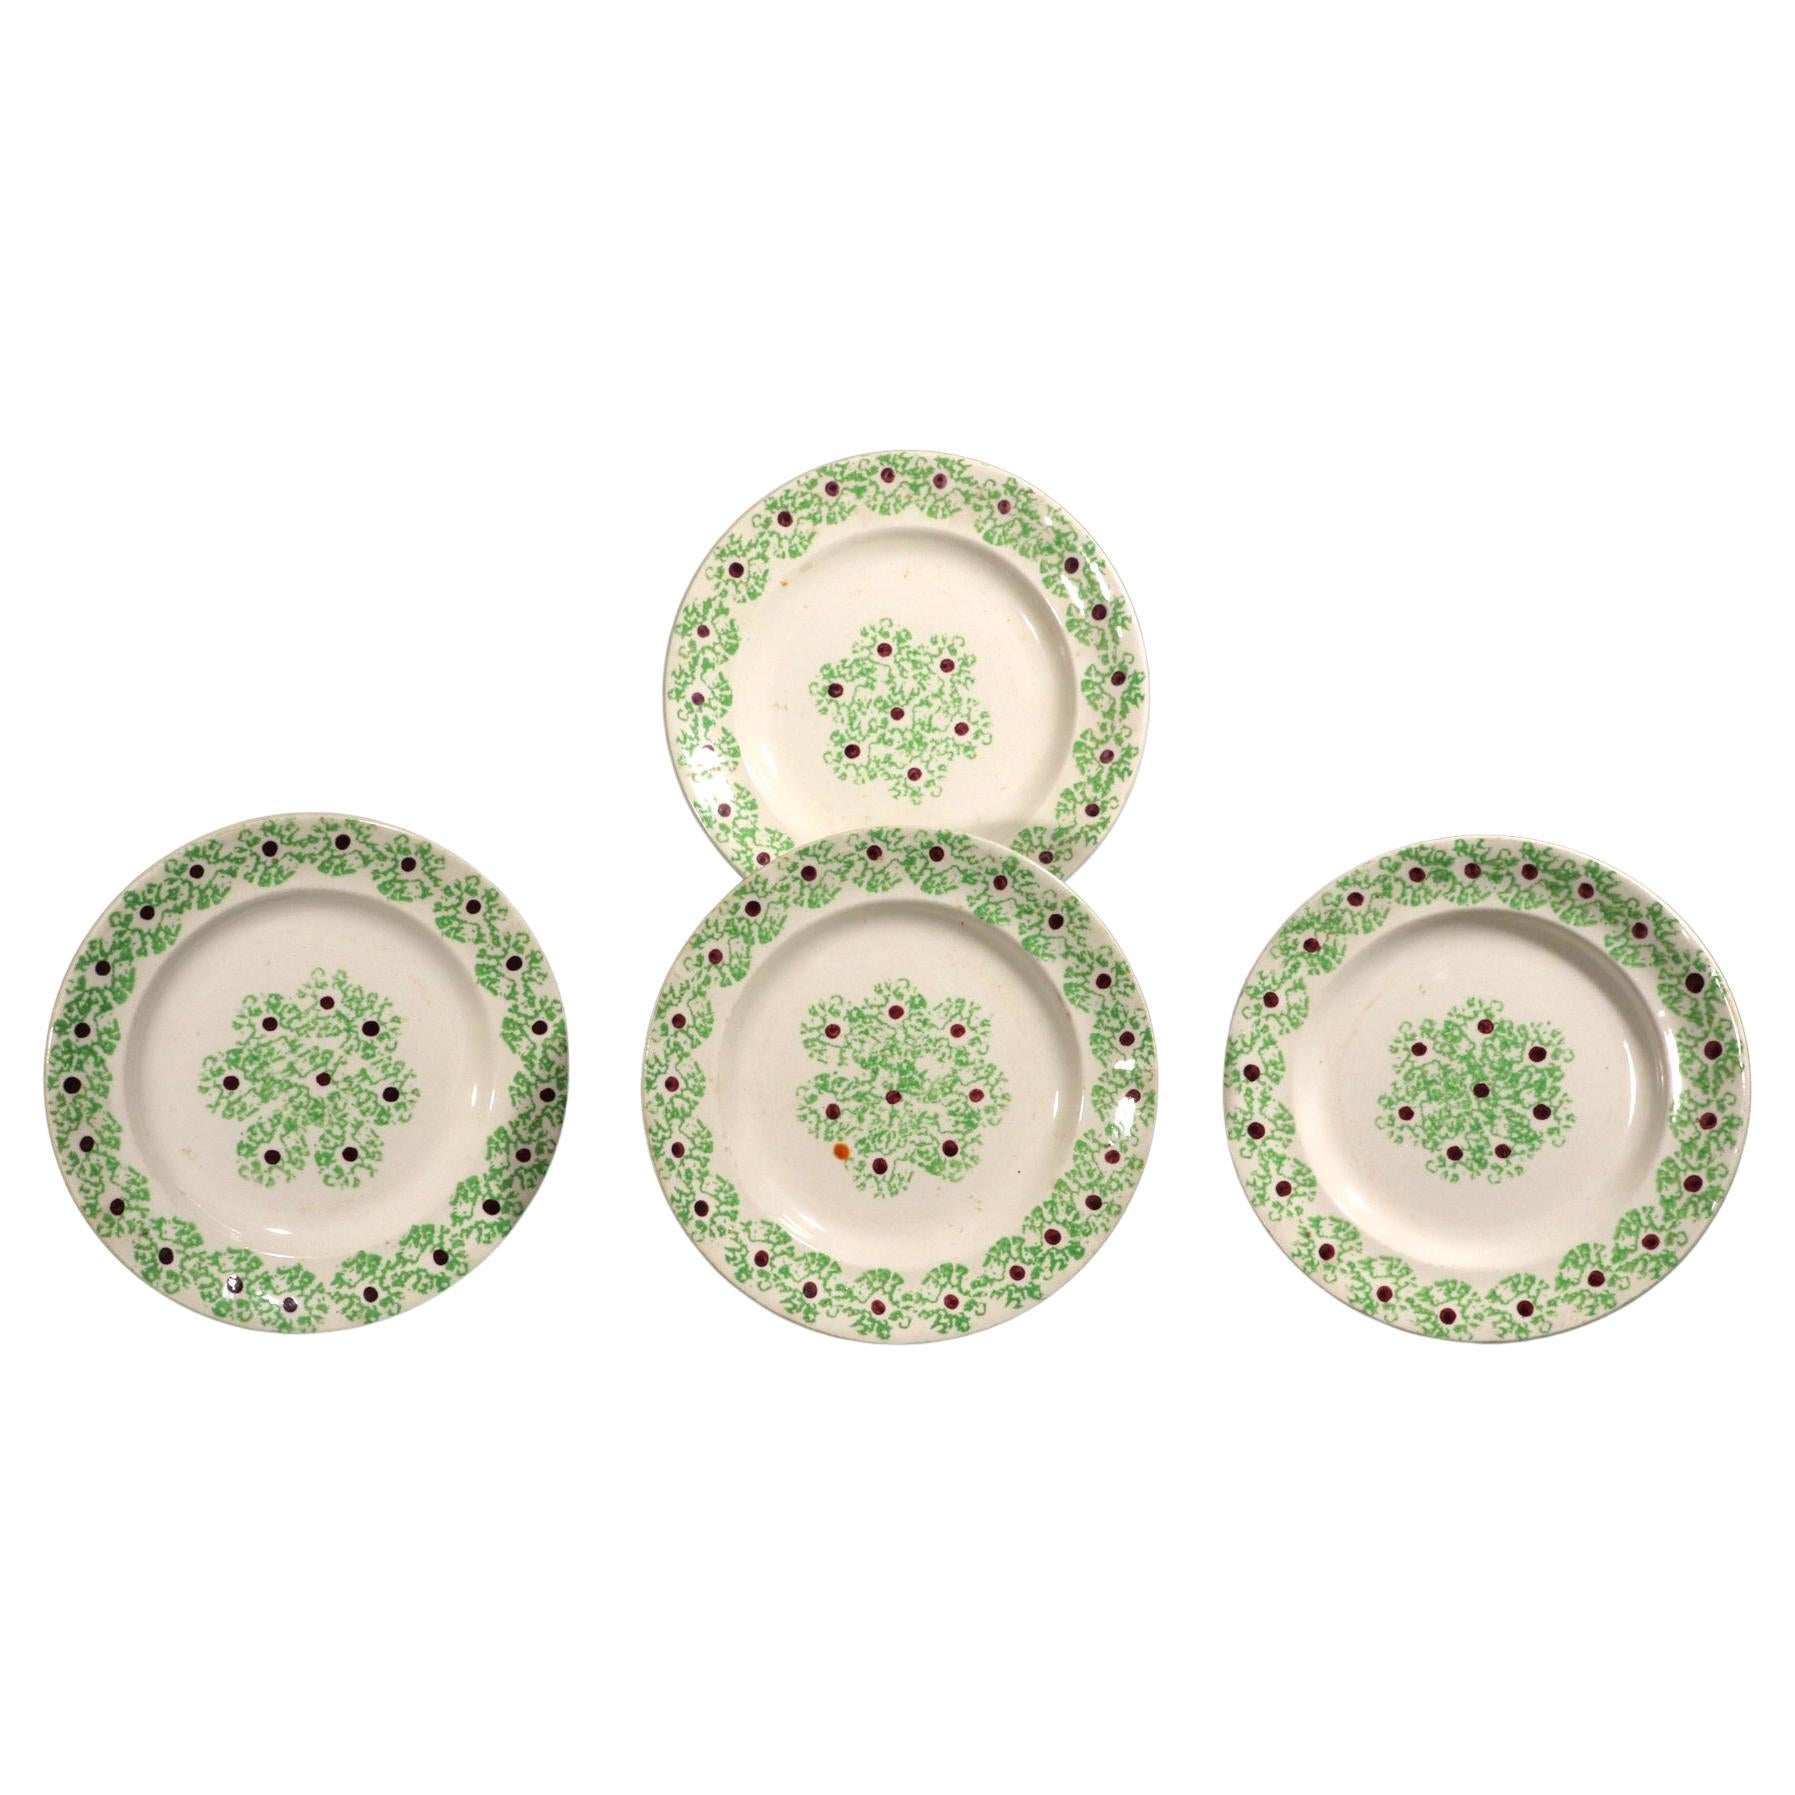 English Pottery Spatterware Plates- A Set of Four